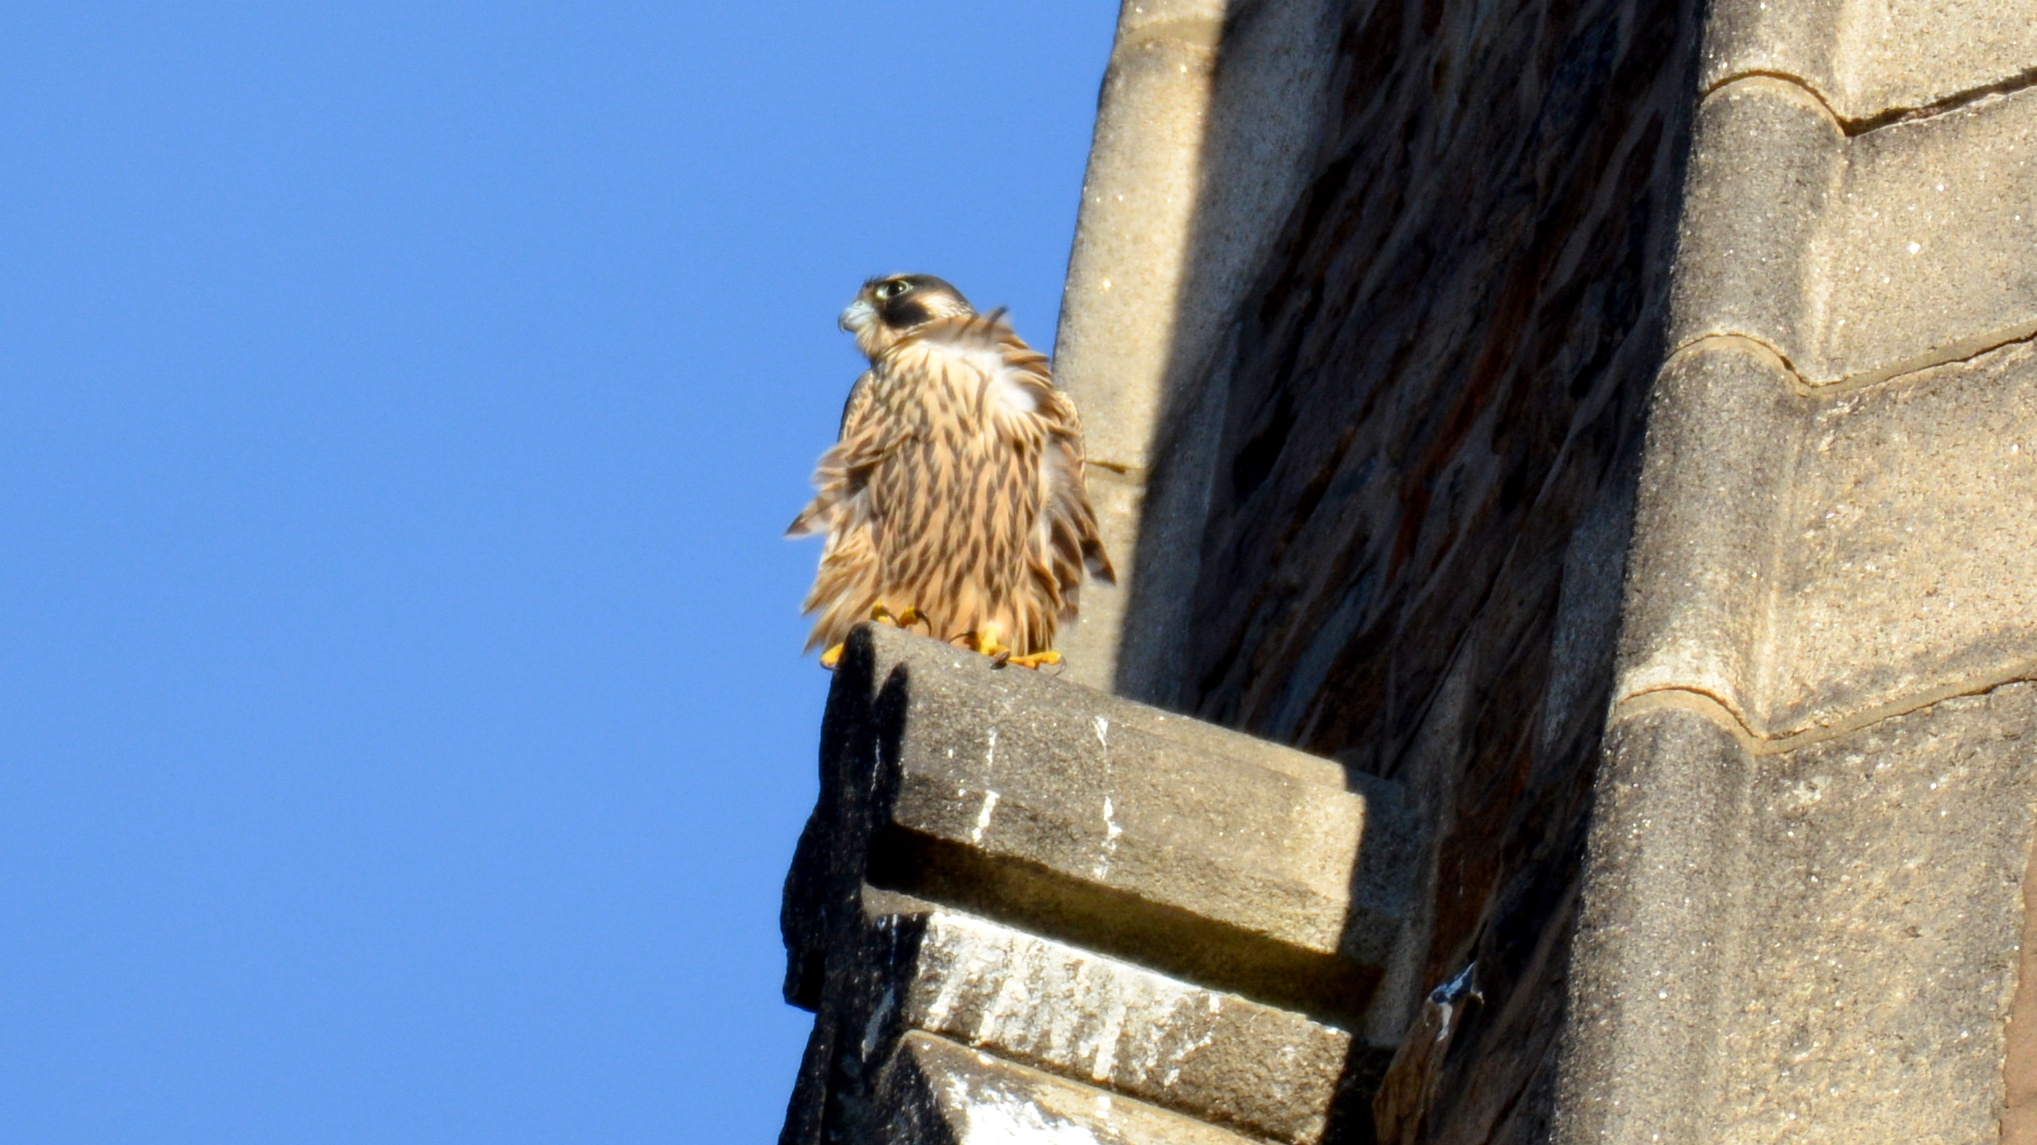 Perching on the steeple